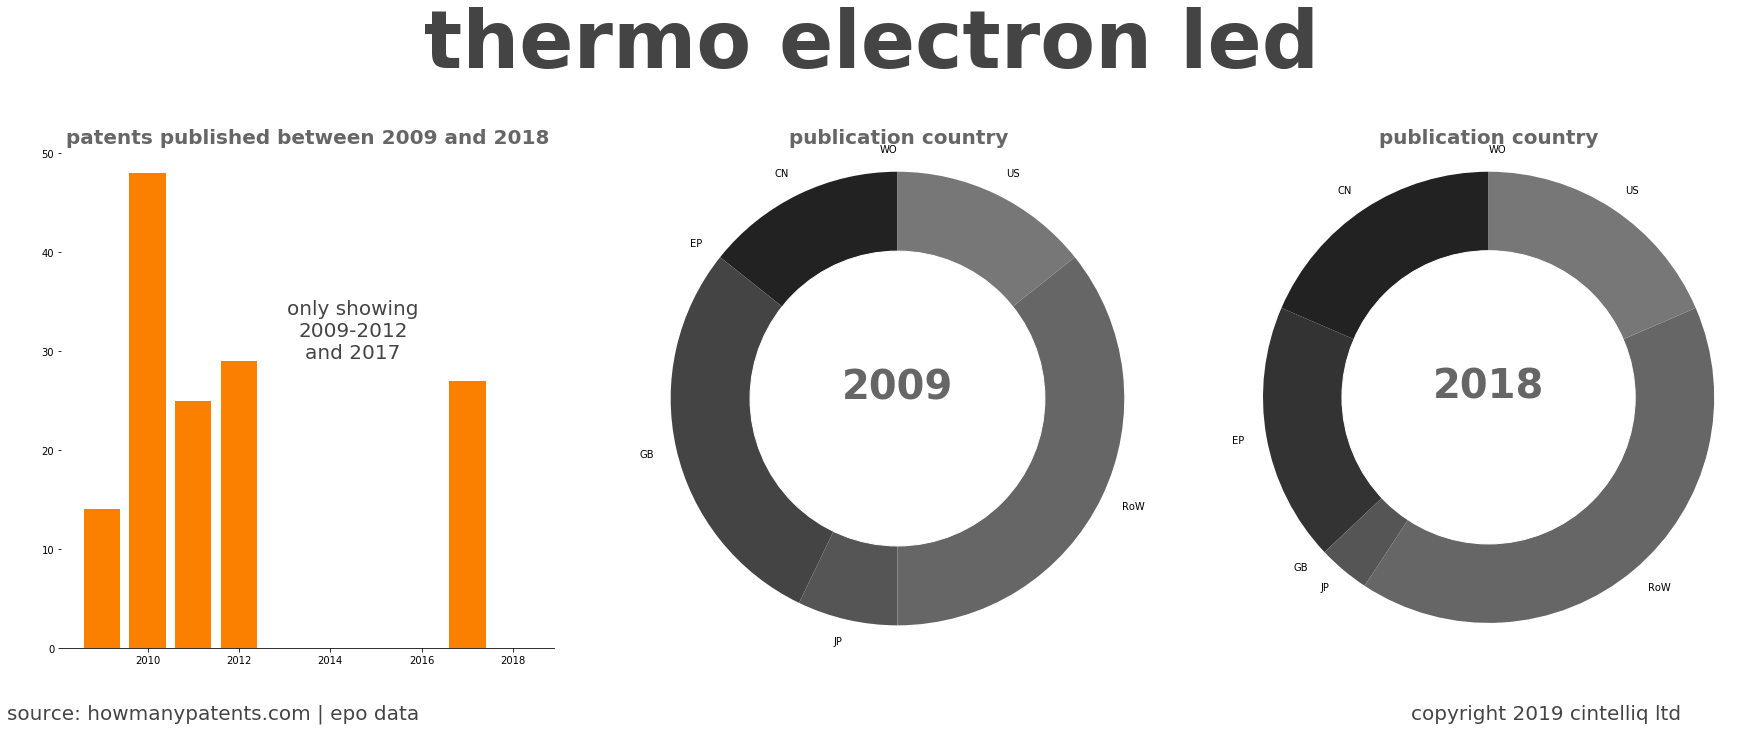 summary of patents for Thermo Electron Led